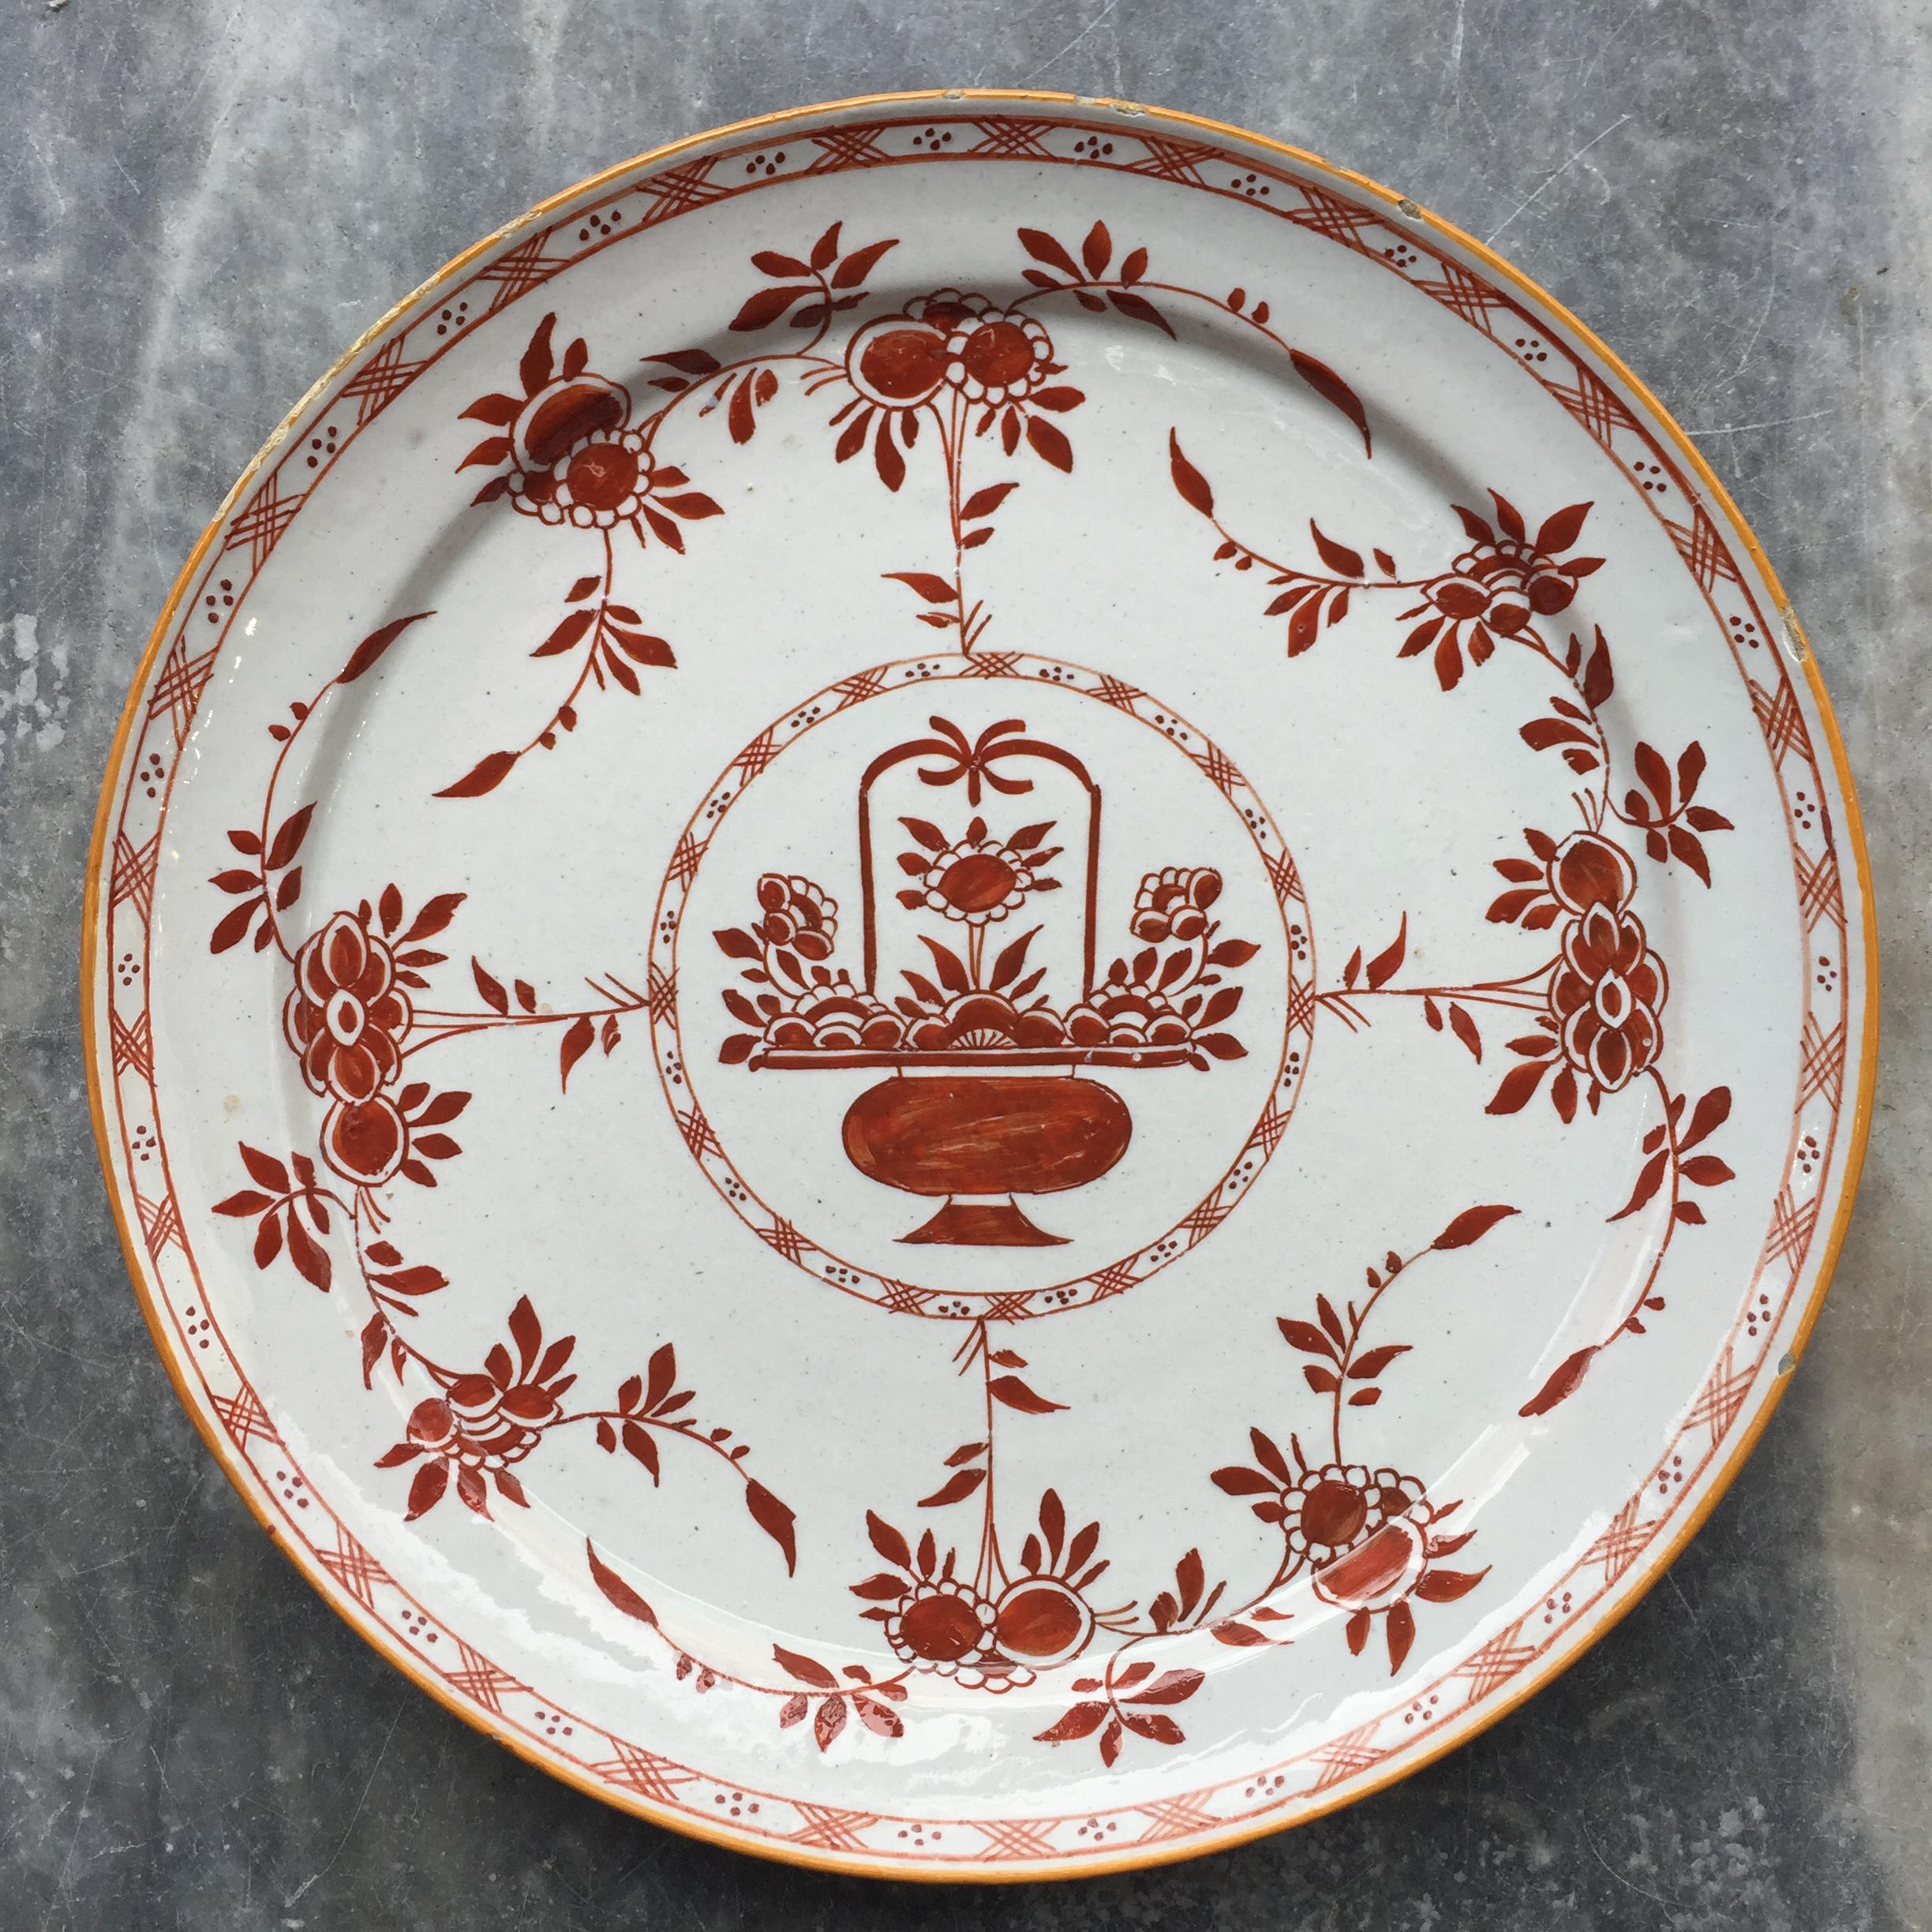 City: Delft
Workshop: De Grieksche A
Owner: Jan Theunisz Dextra
Date: 1758 - 1764.





Plate with decoration in iron red of a flower basket in a circle. Branches with flowers grow out of the circle.

Marked: D 7